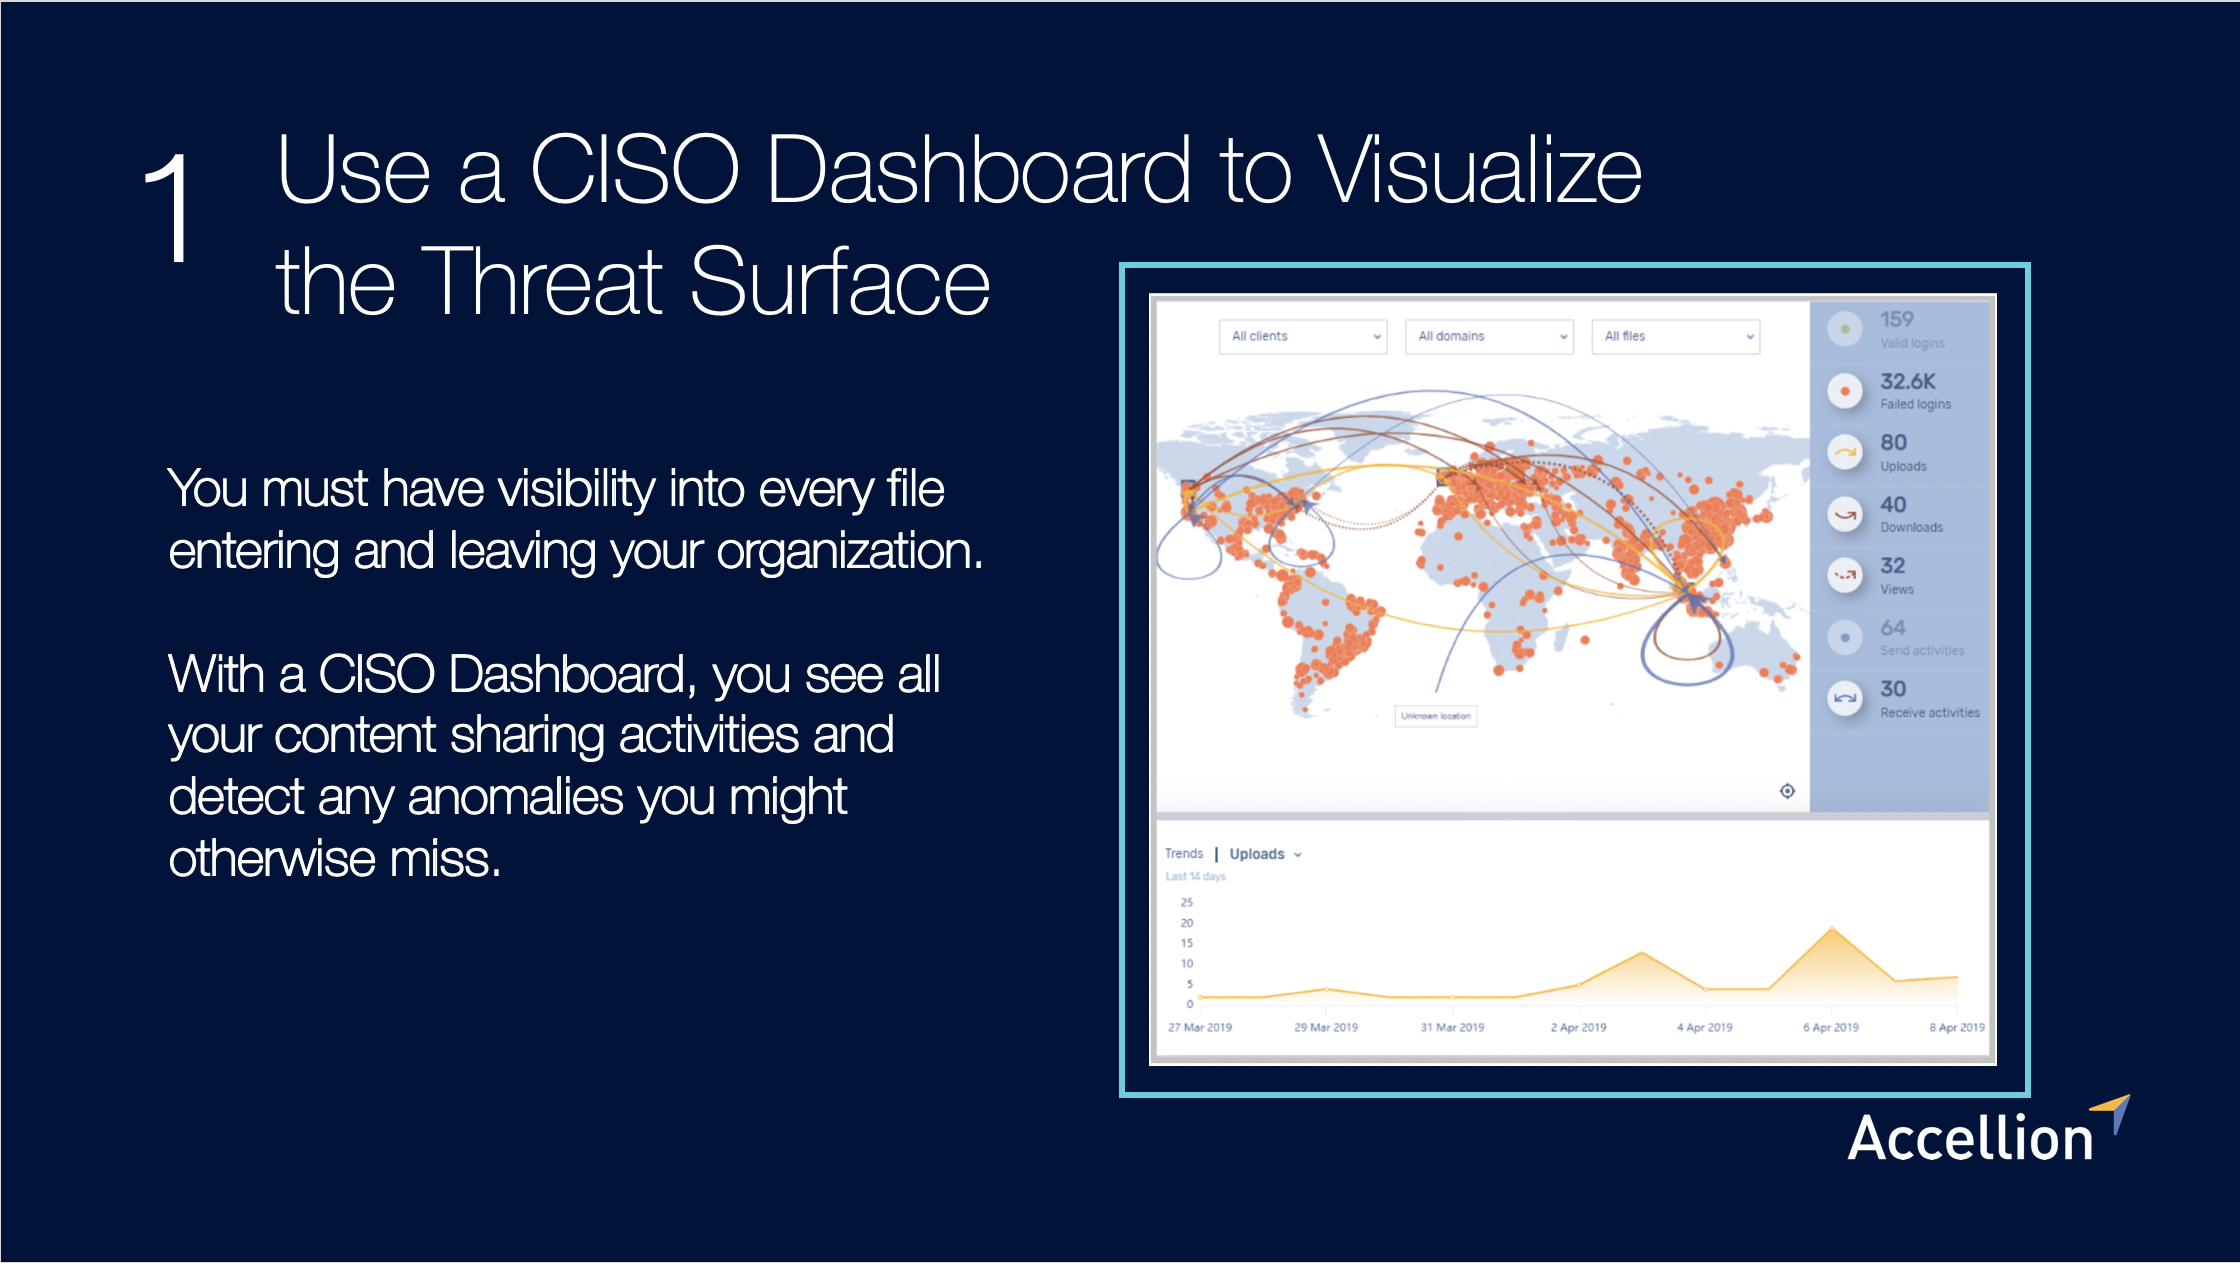 Use a CISO Dashboard to Visualize the Threat Surface